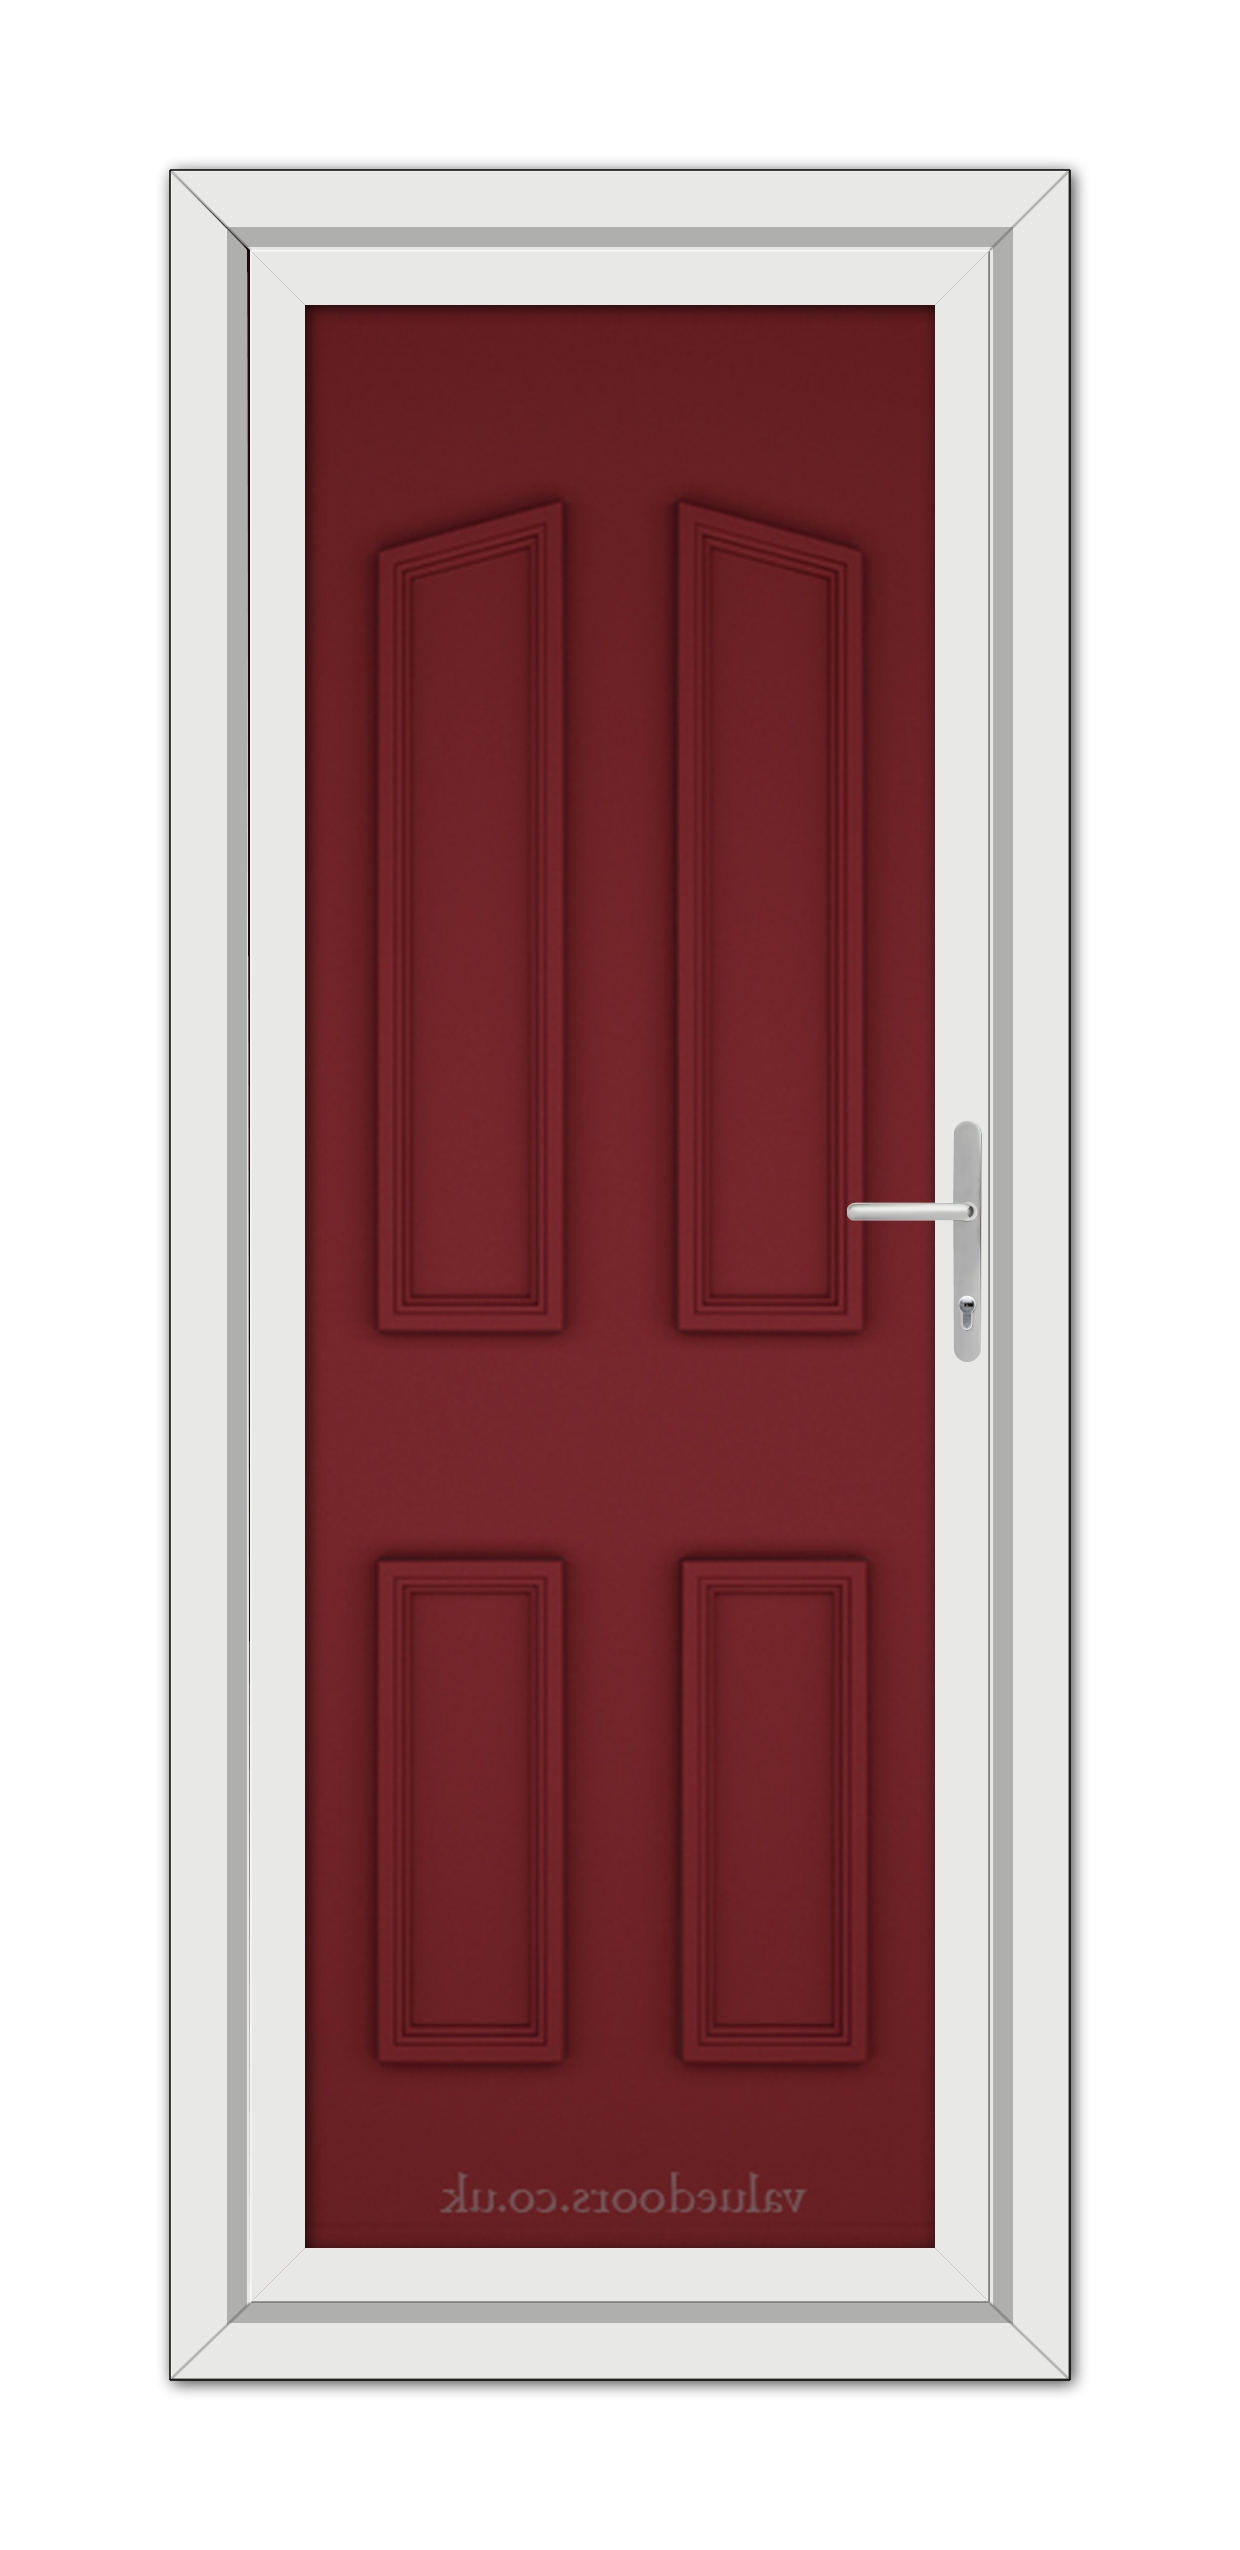 A modern Red Kensington Solid uPVC Door with a silver handle, set within a white door frame.